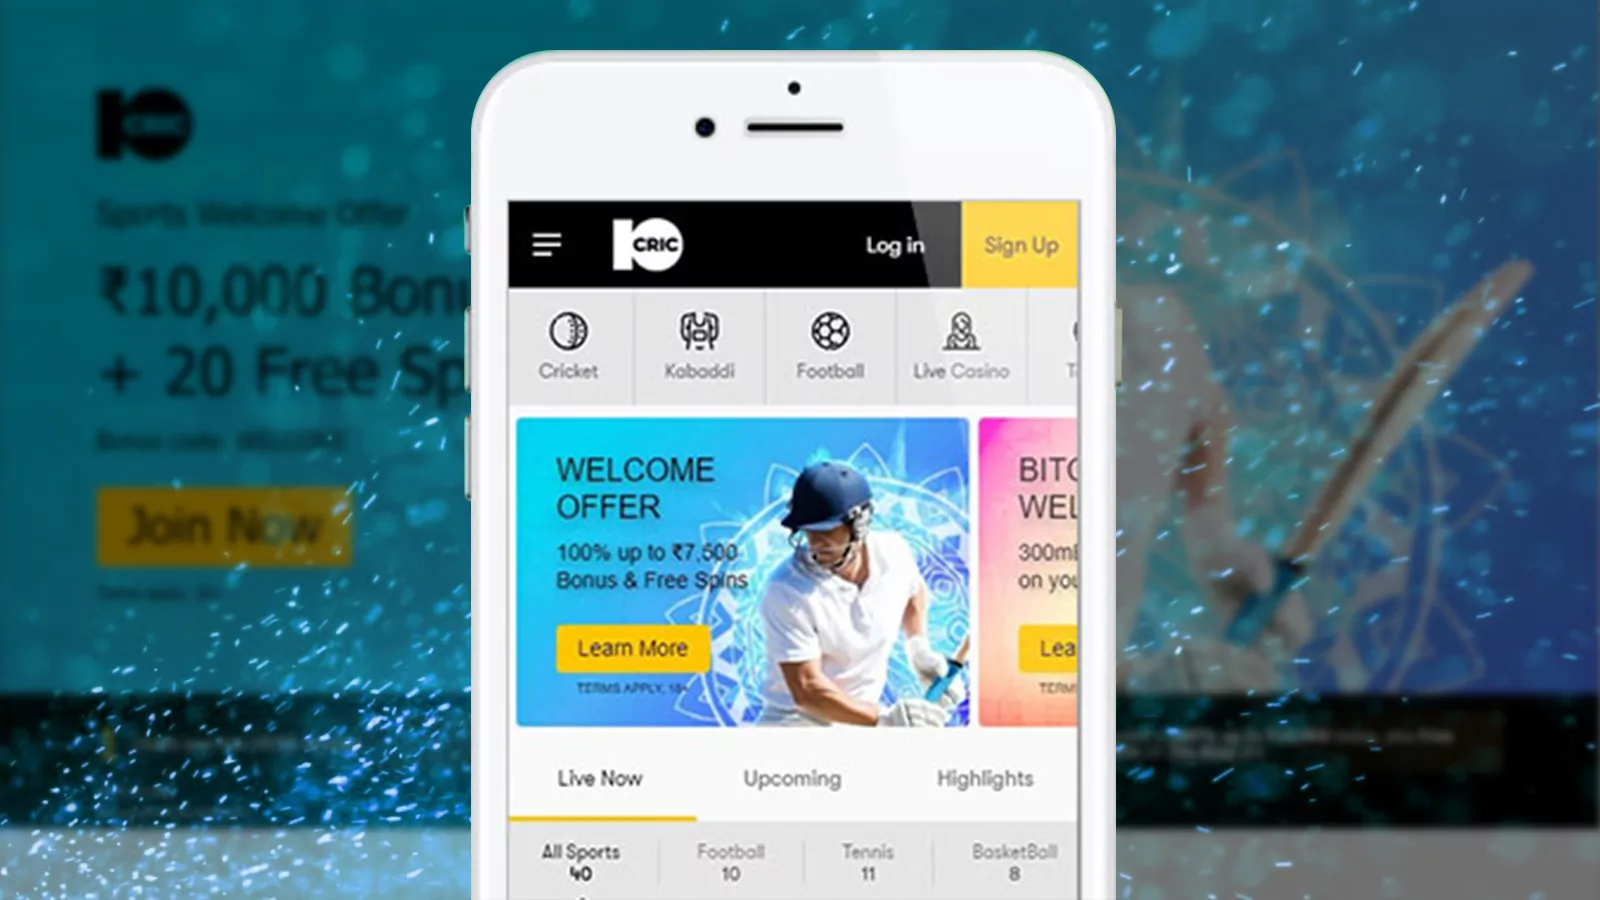 Download and install 10cric app for cricket betting.